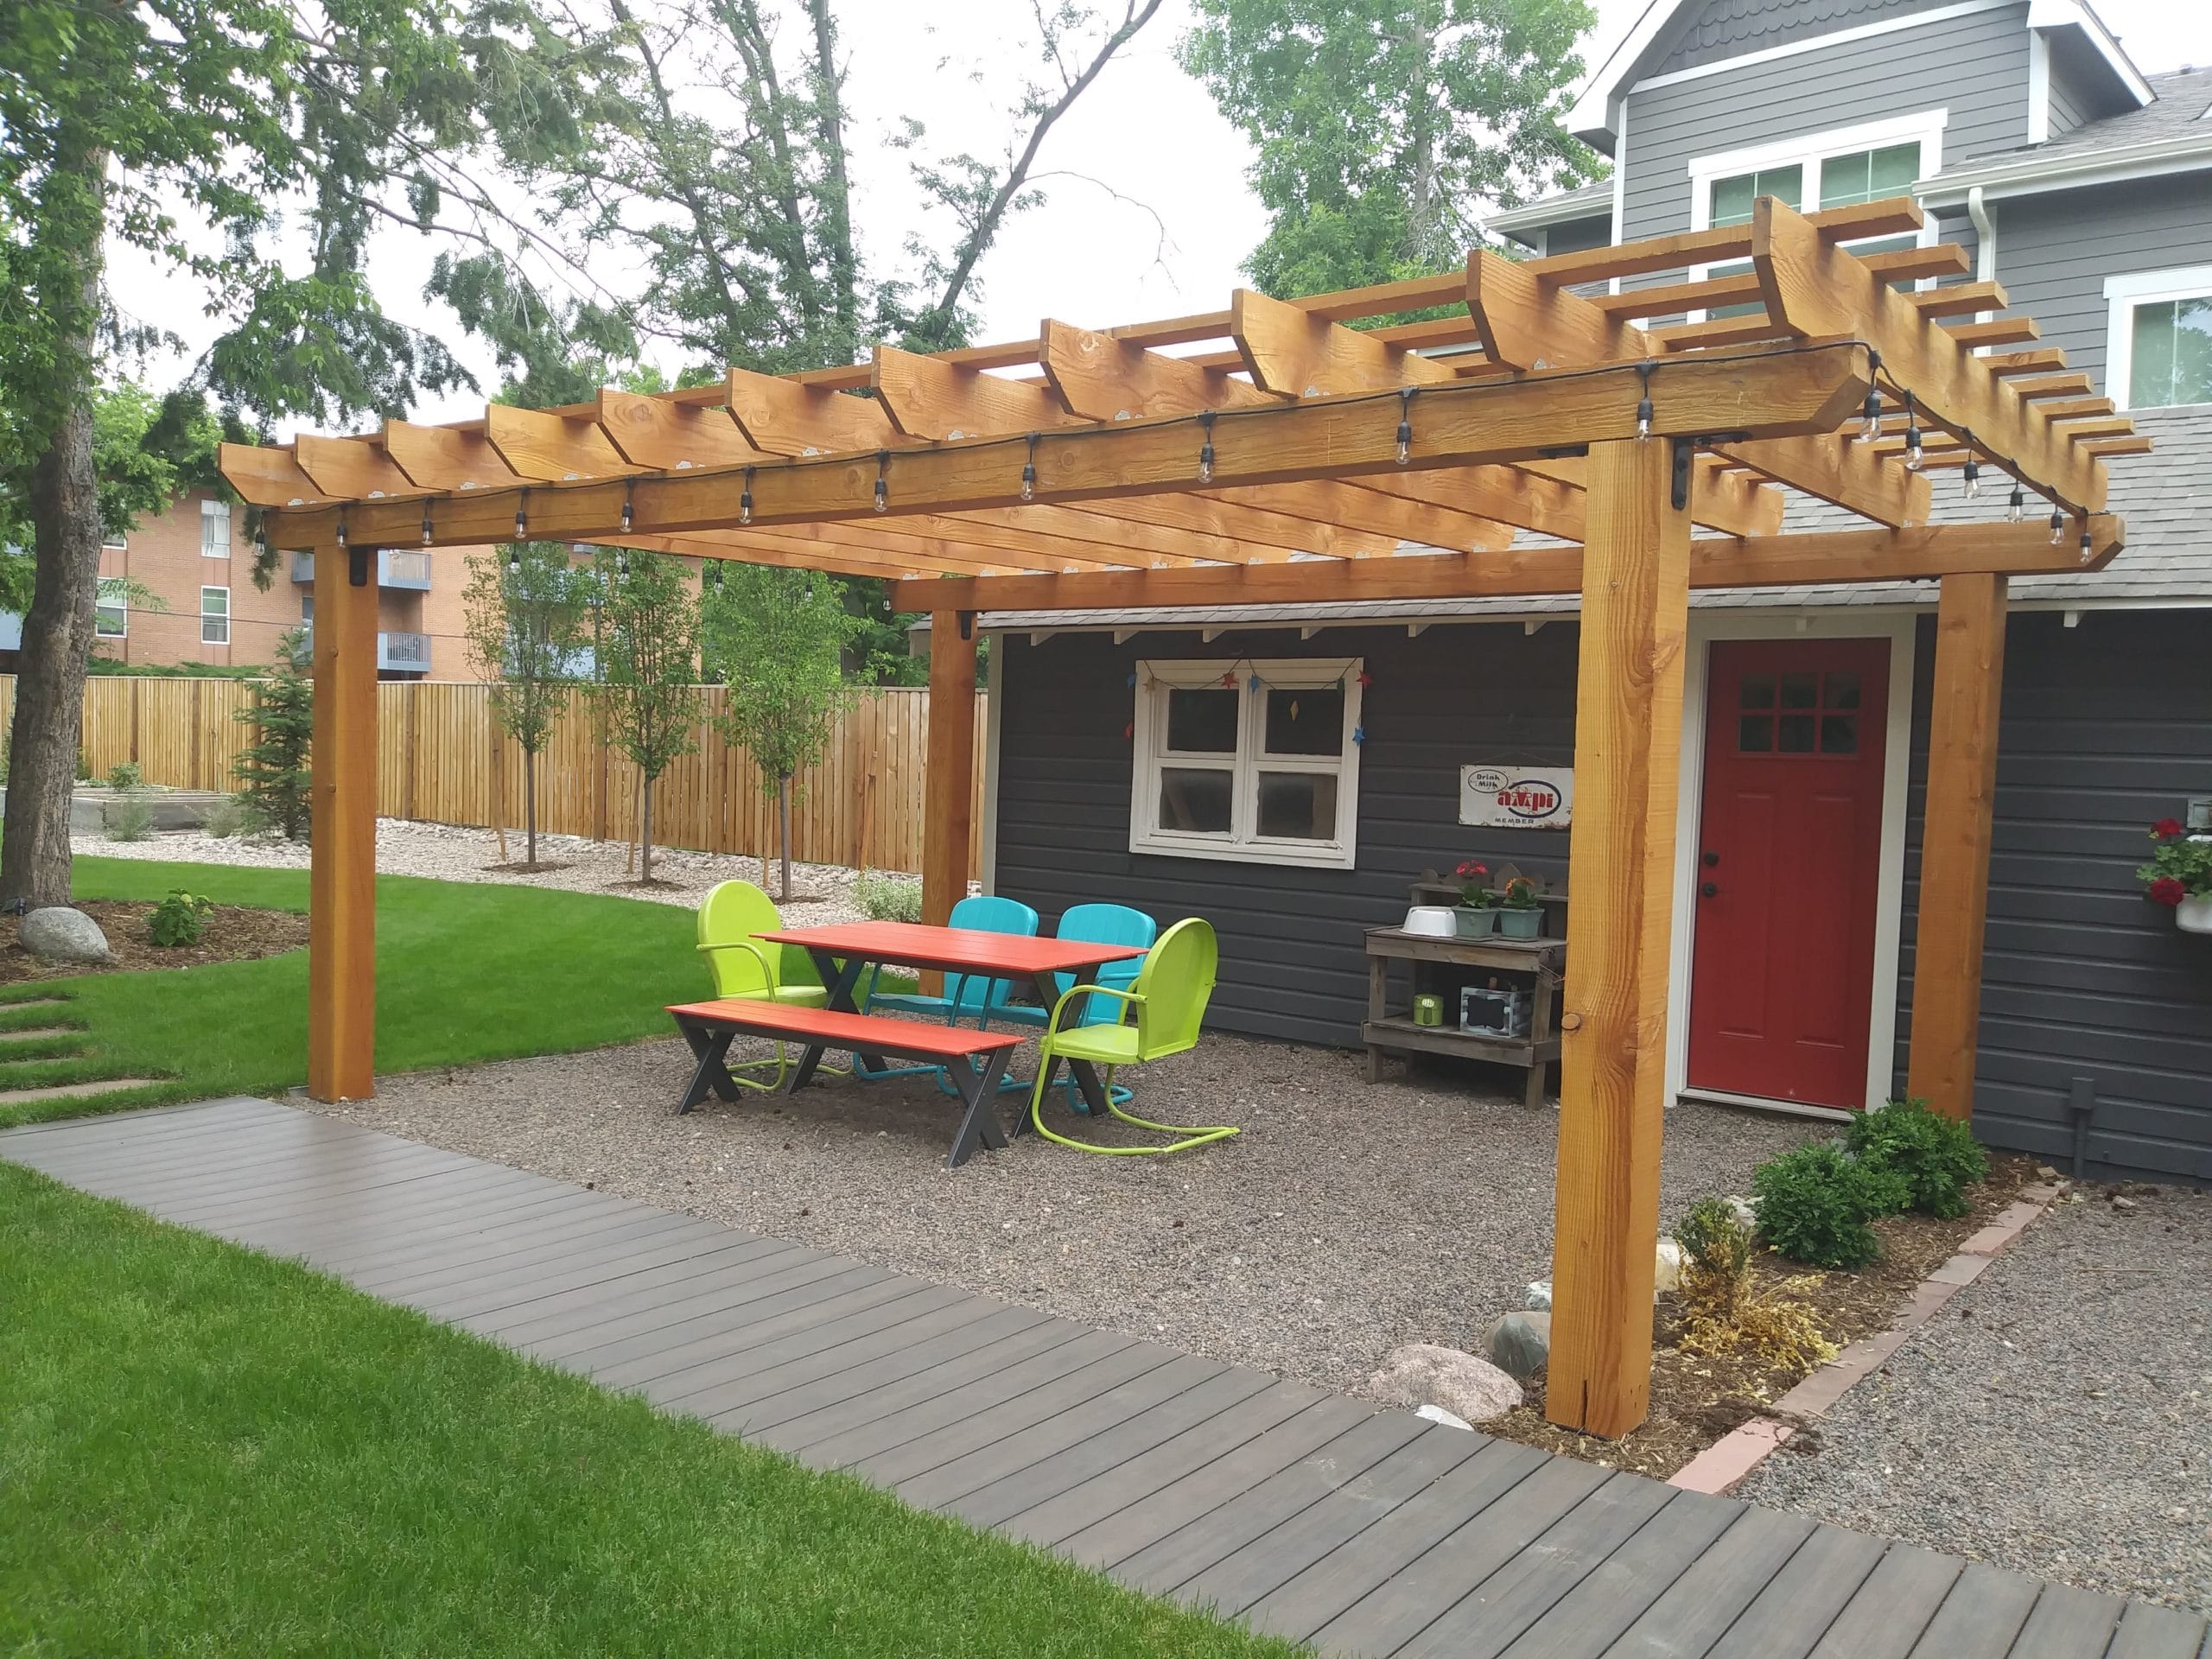 Small gravel patio with seating and pergola over head.